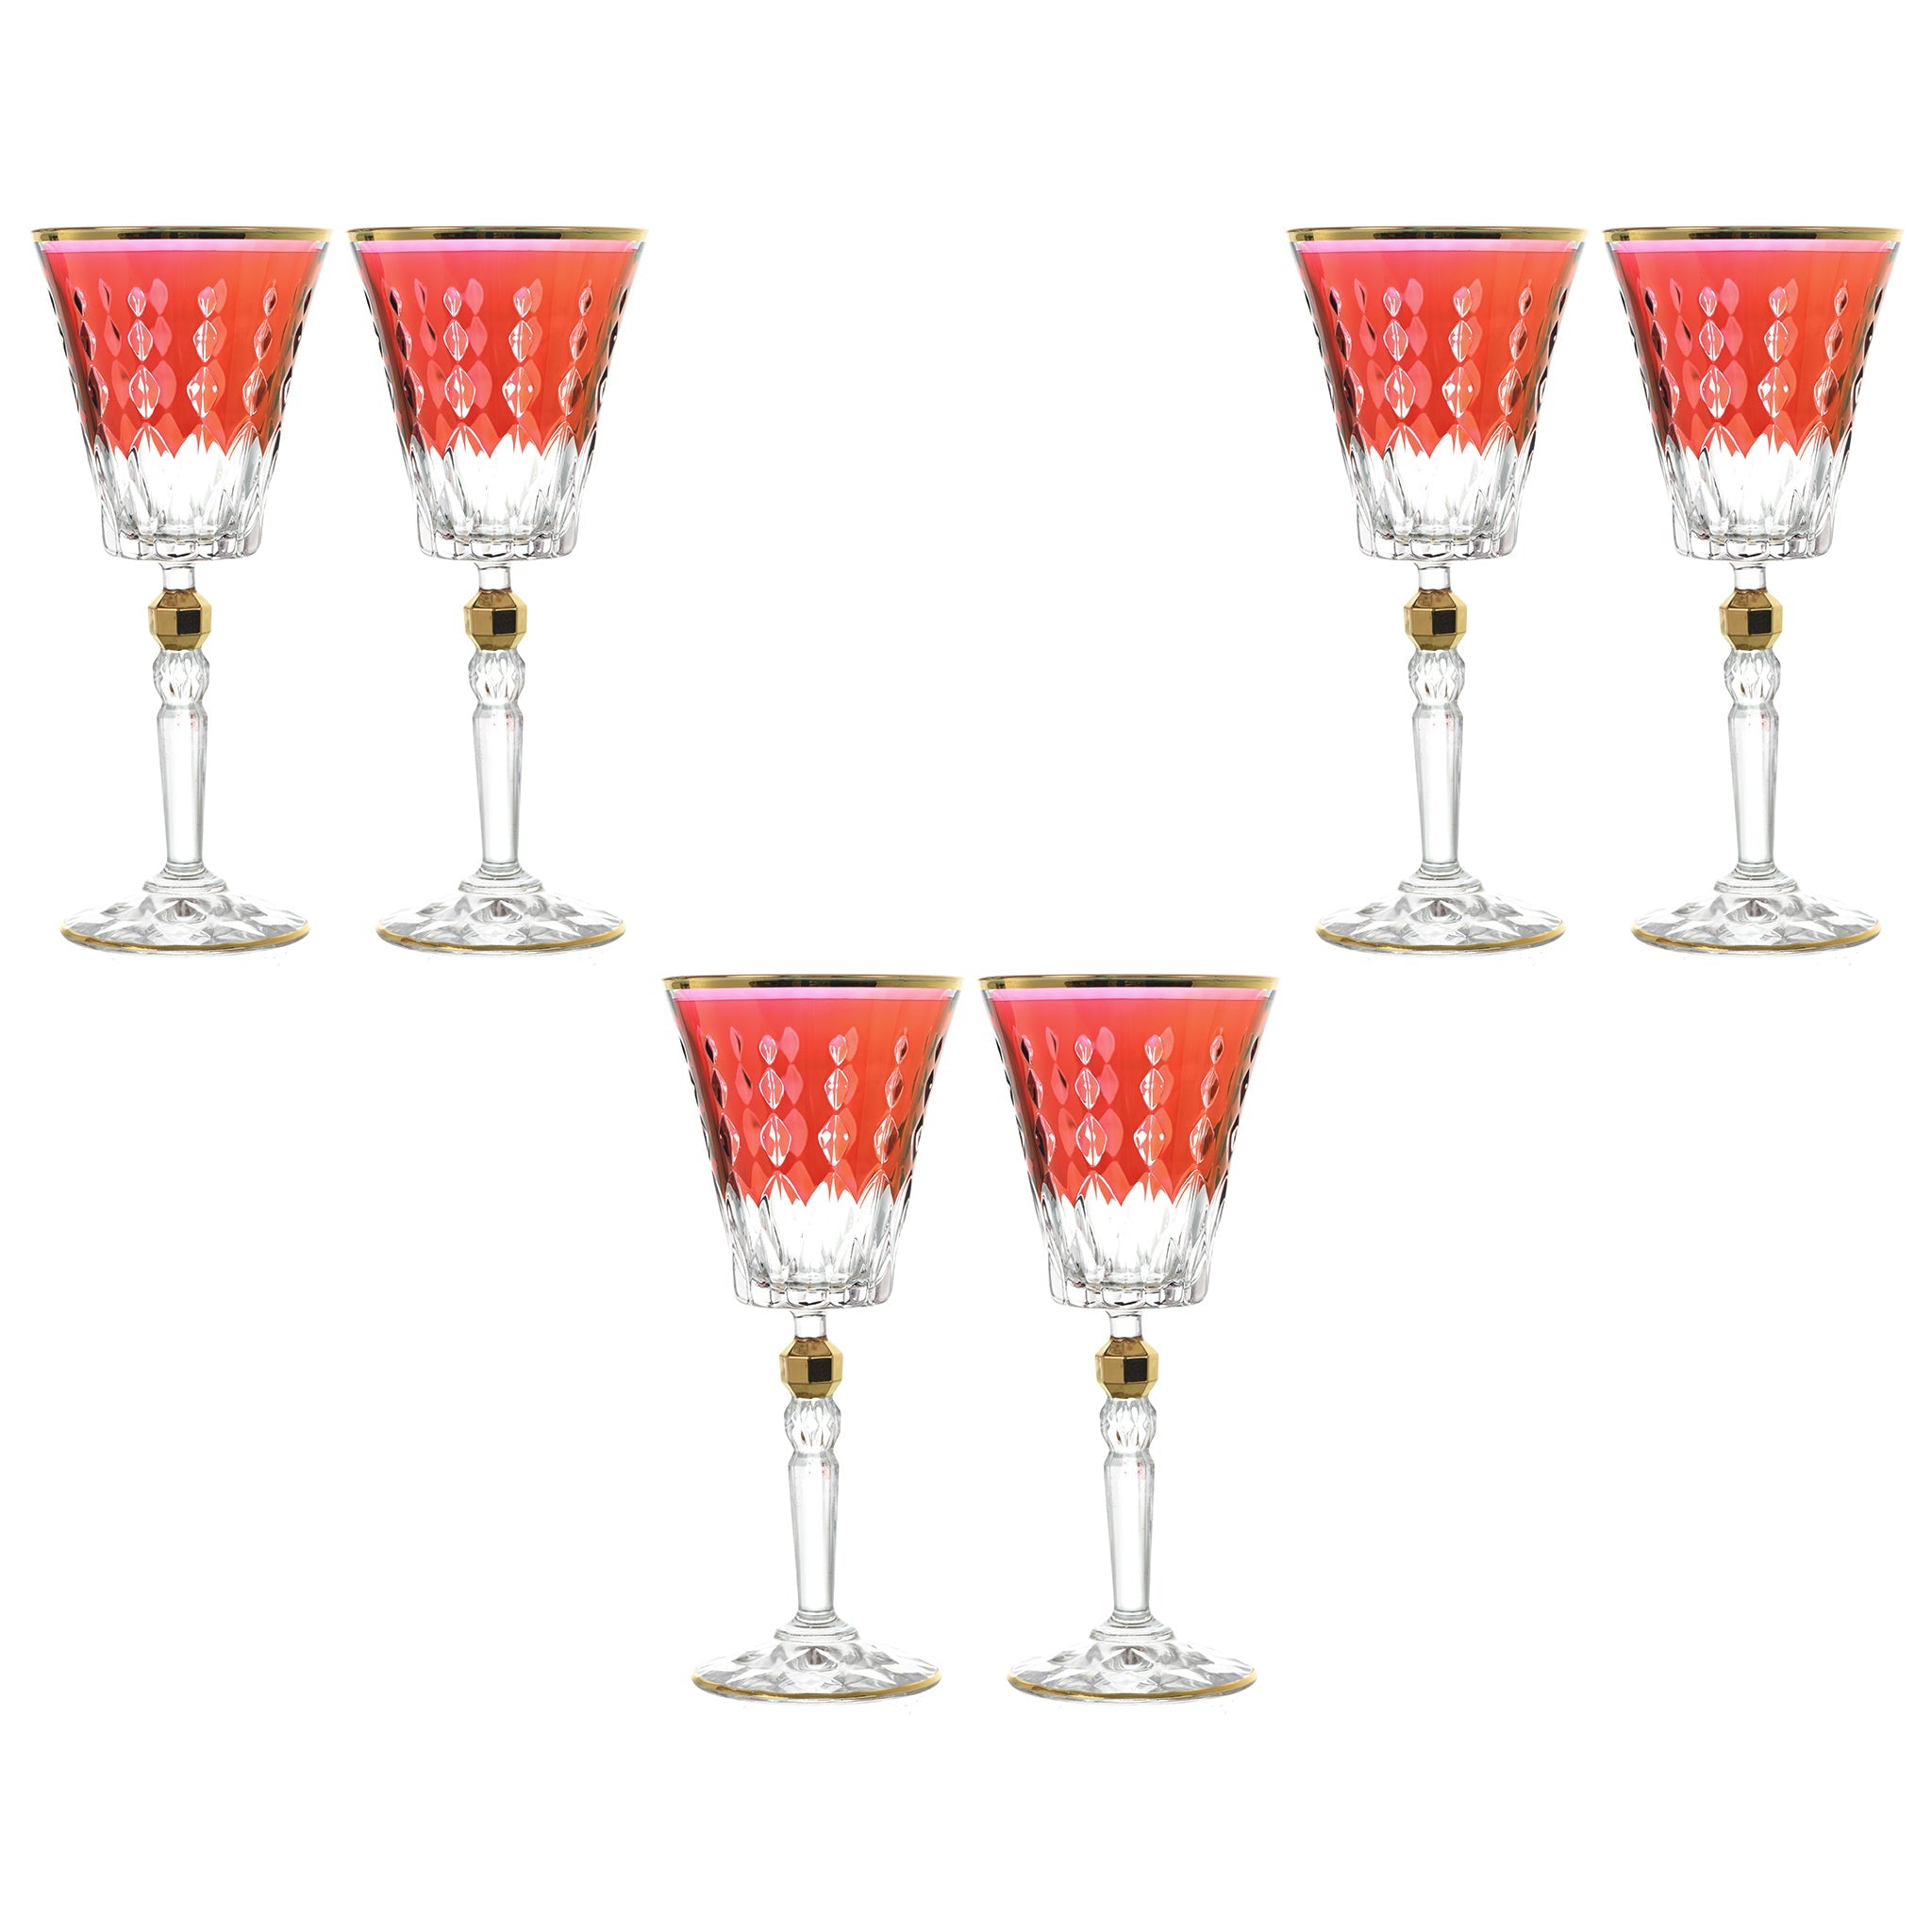 RCR Italy - Goblet Glass Set 6 Pieces - Red & Gold - 220ml - 380003156